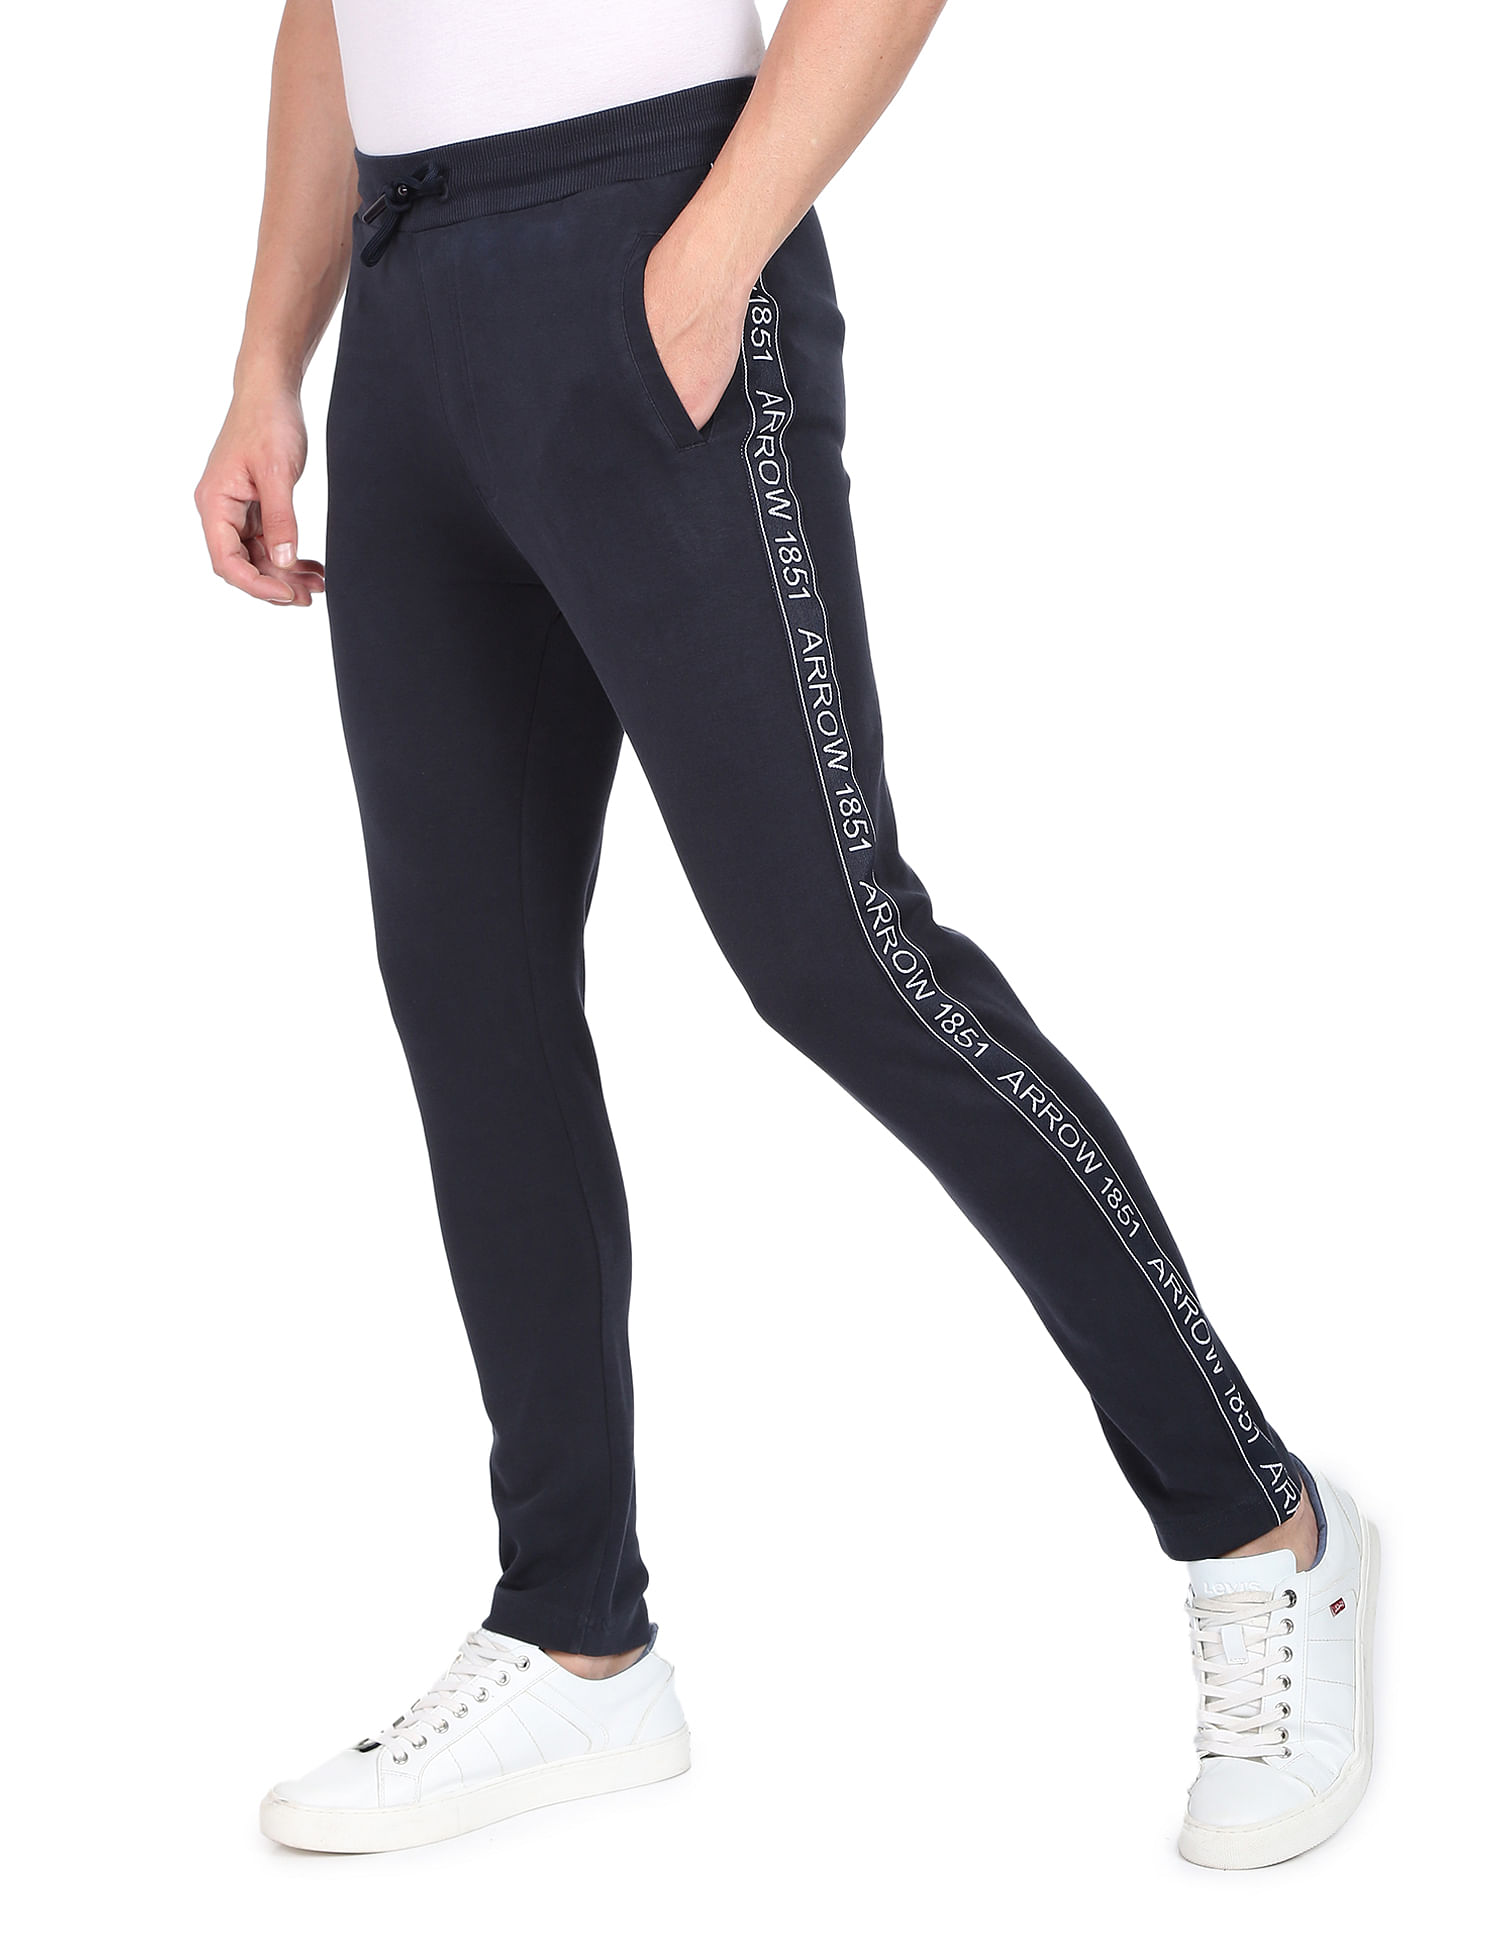 Mens Skinny Joggers For Casual Fitness And Workout 2023 Brand Gymx Track  Pants With Brand Logo Print New Autumn Fashion From Nascccz1, $8.92 |  DHgate.Com